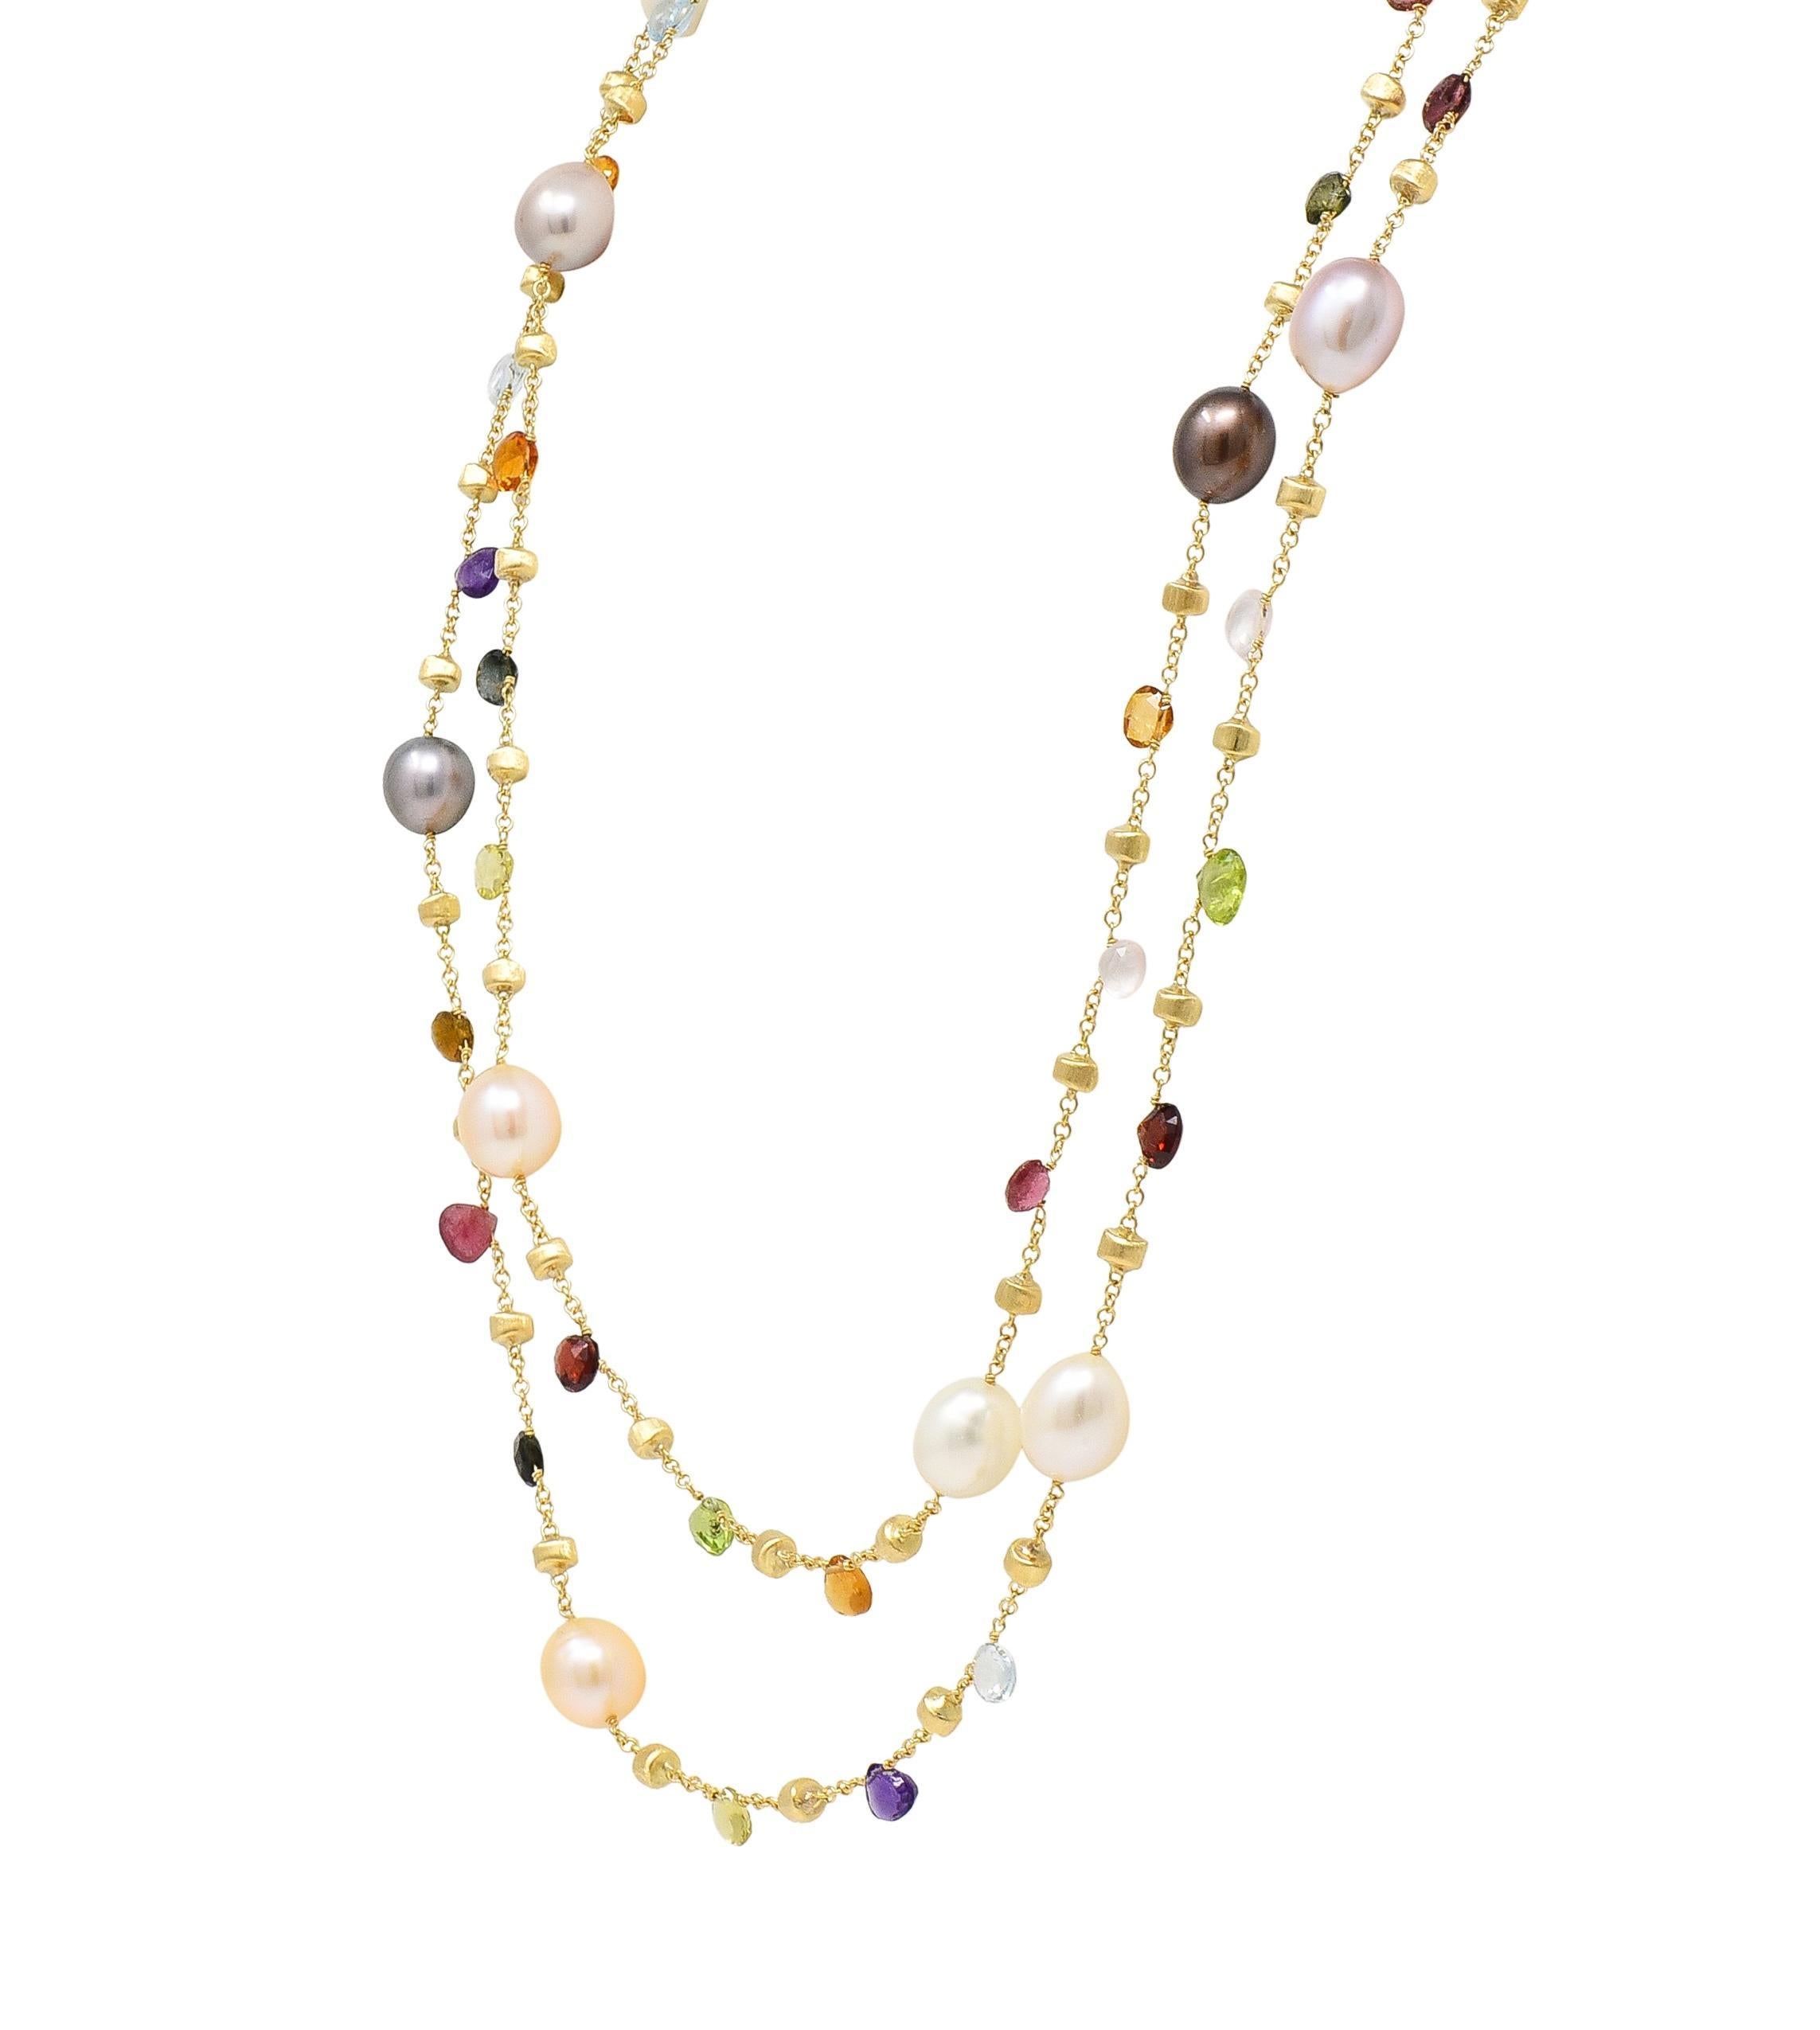 Marco Bicego Cultured Pearl Multi-Gem 18 Karat Yellow Gold Confetti Necklace In Excellent Condition For Sale In Philadelphia, PA